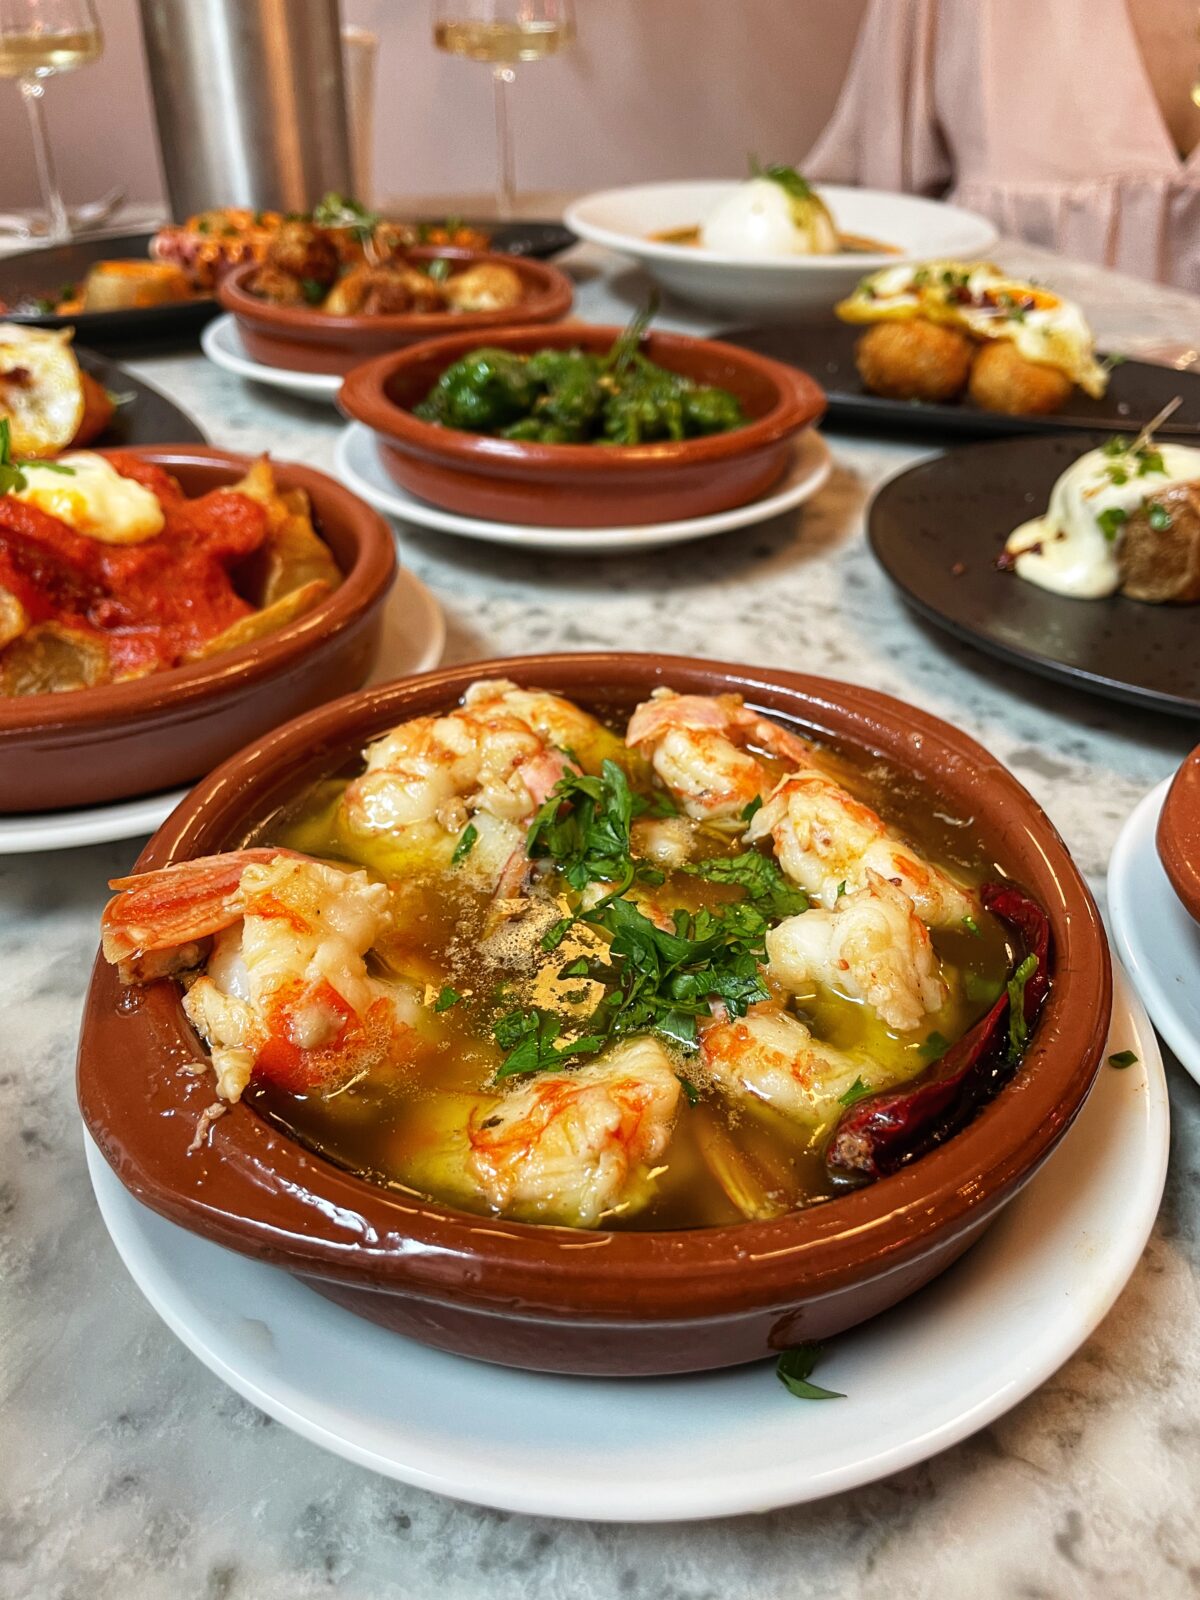 Tapas in Ancoats, Manchester